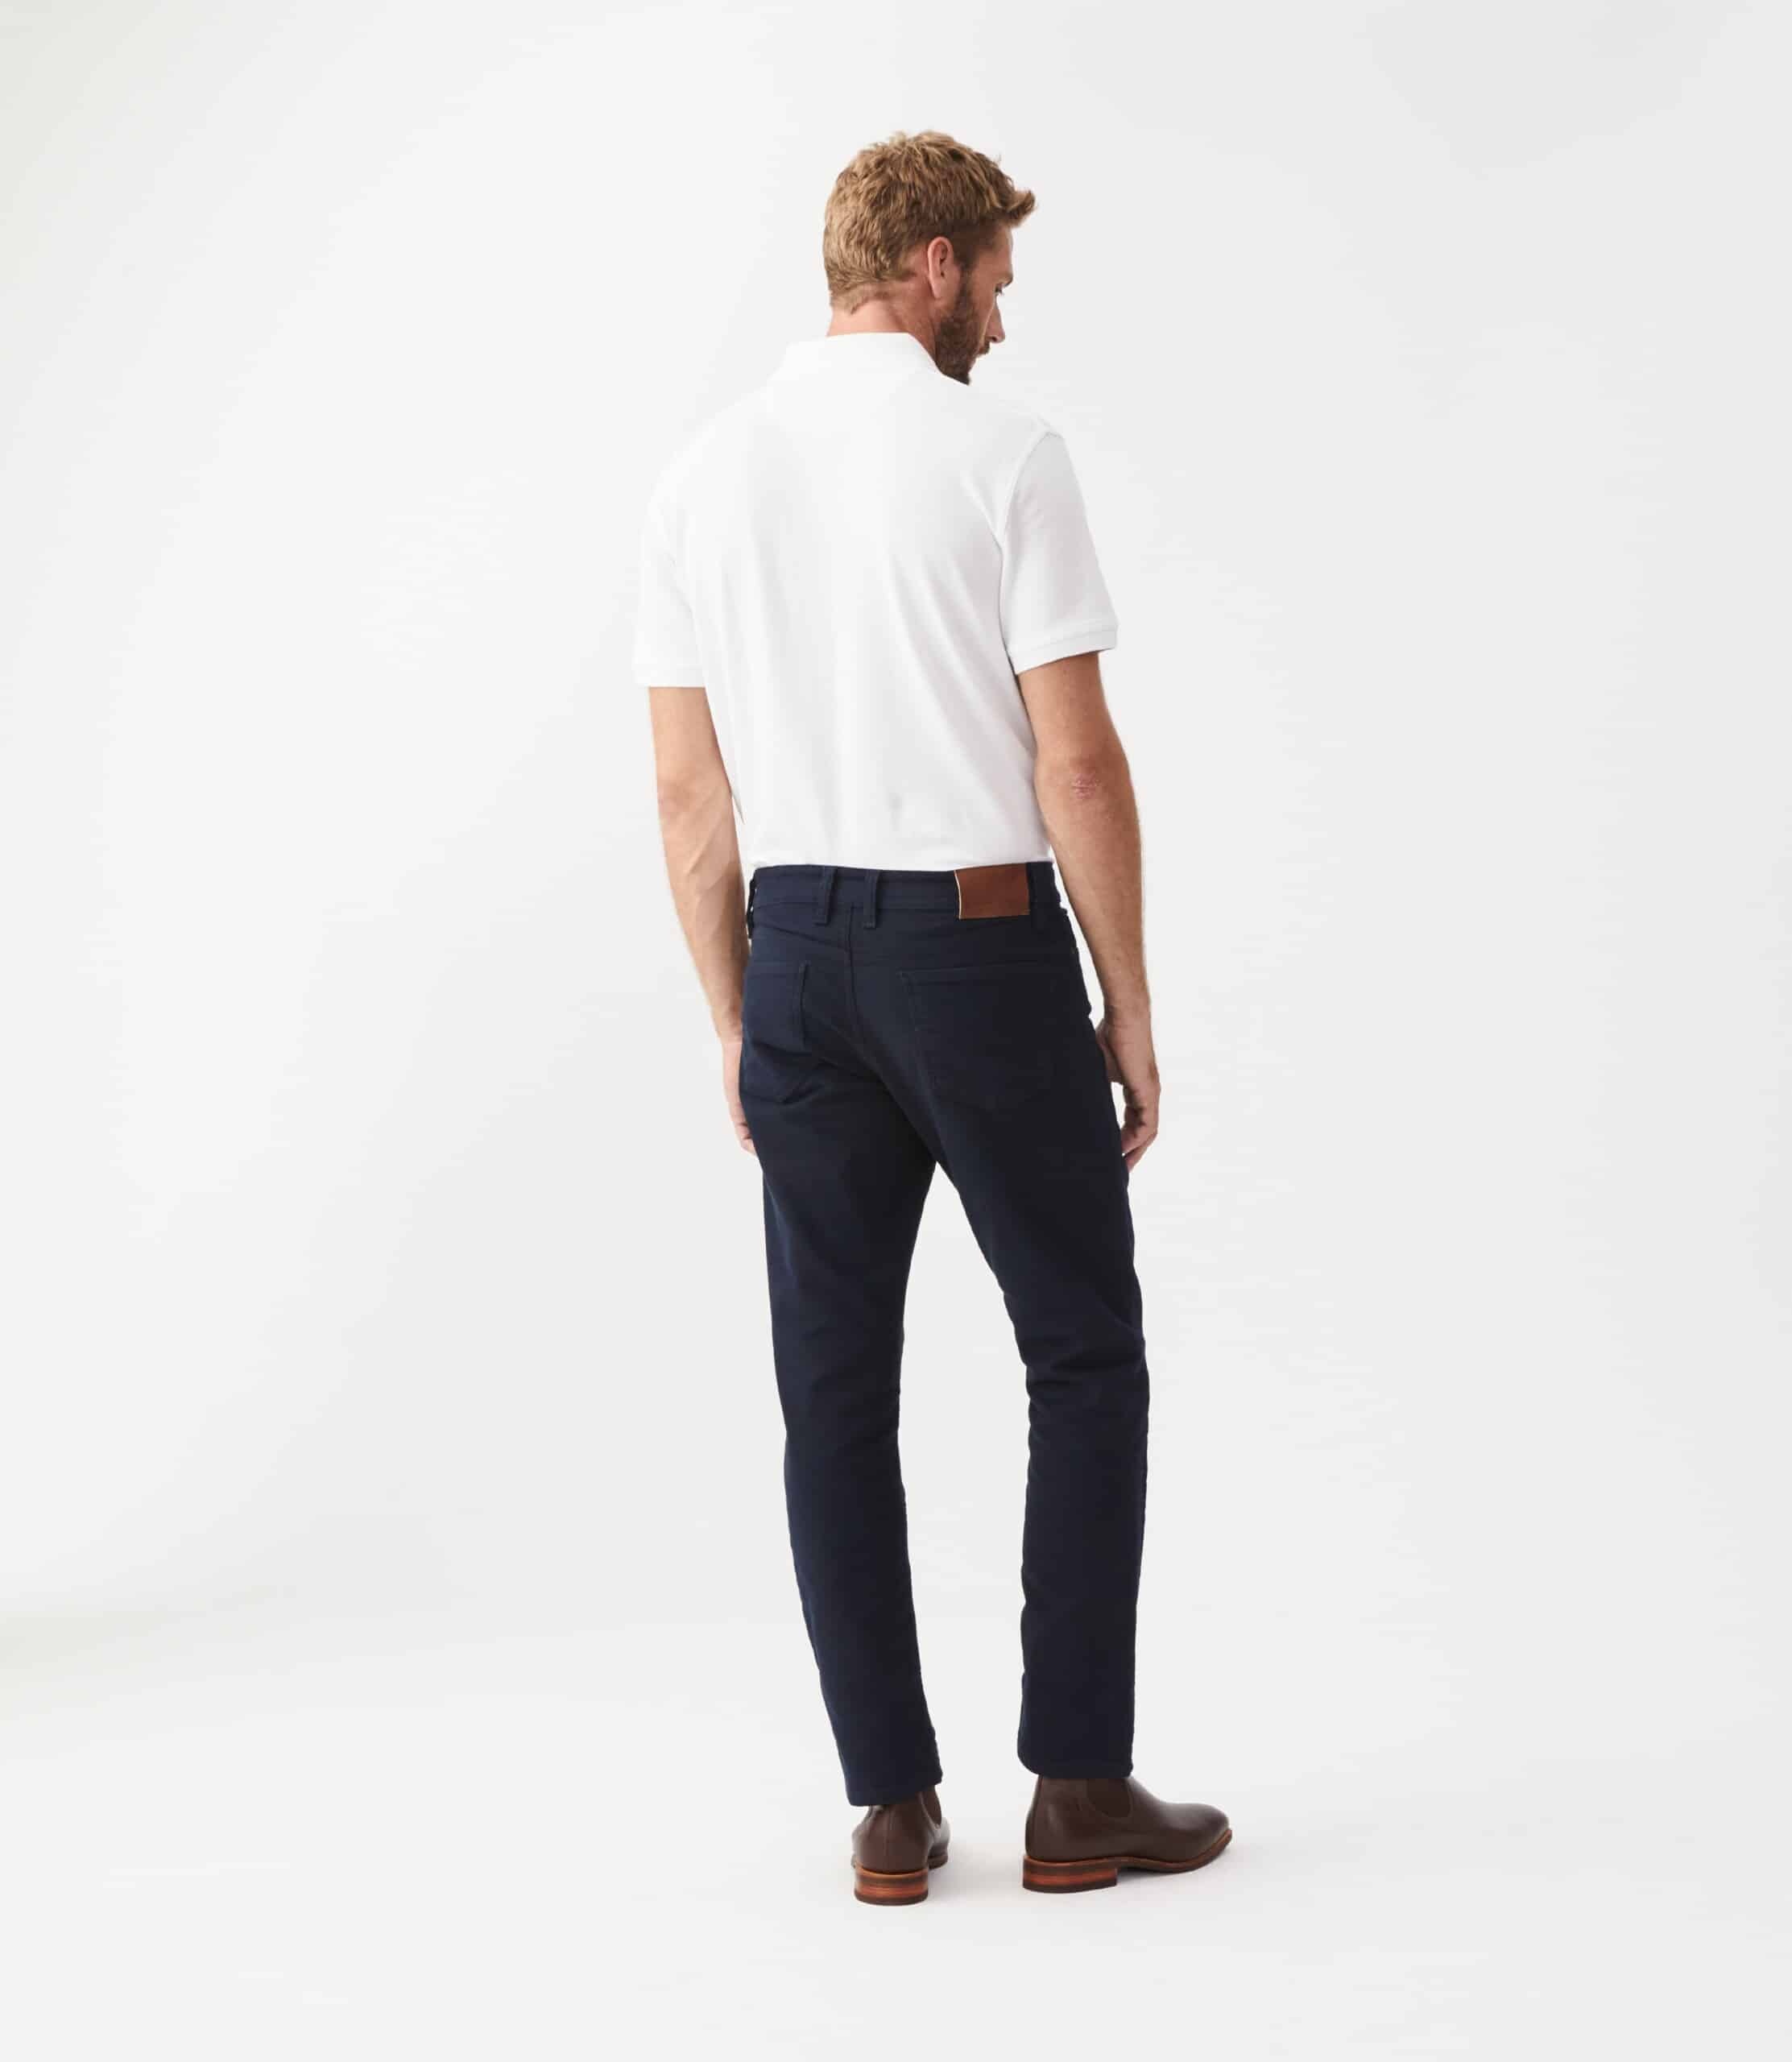 Ramco Moleskin Trousers in Navy - Out and About